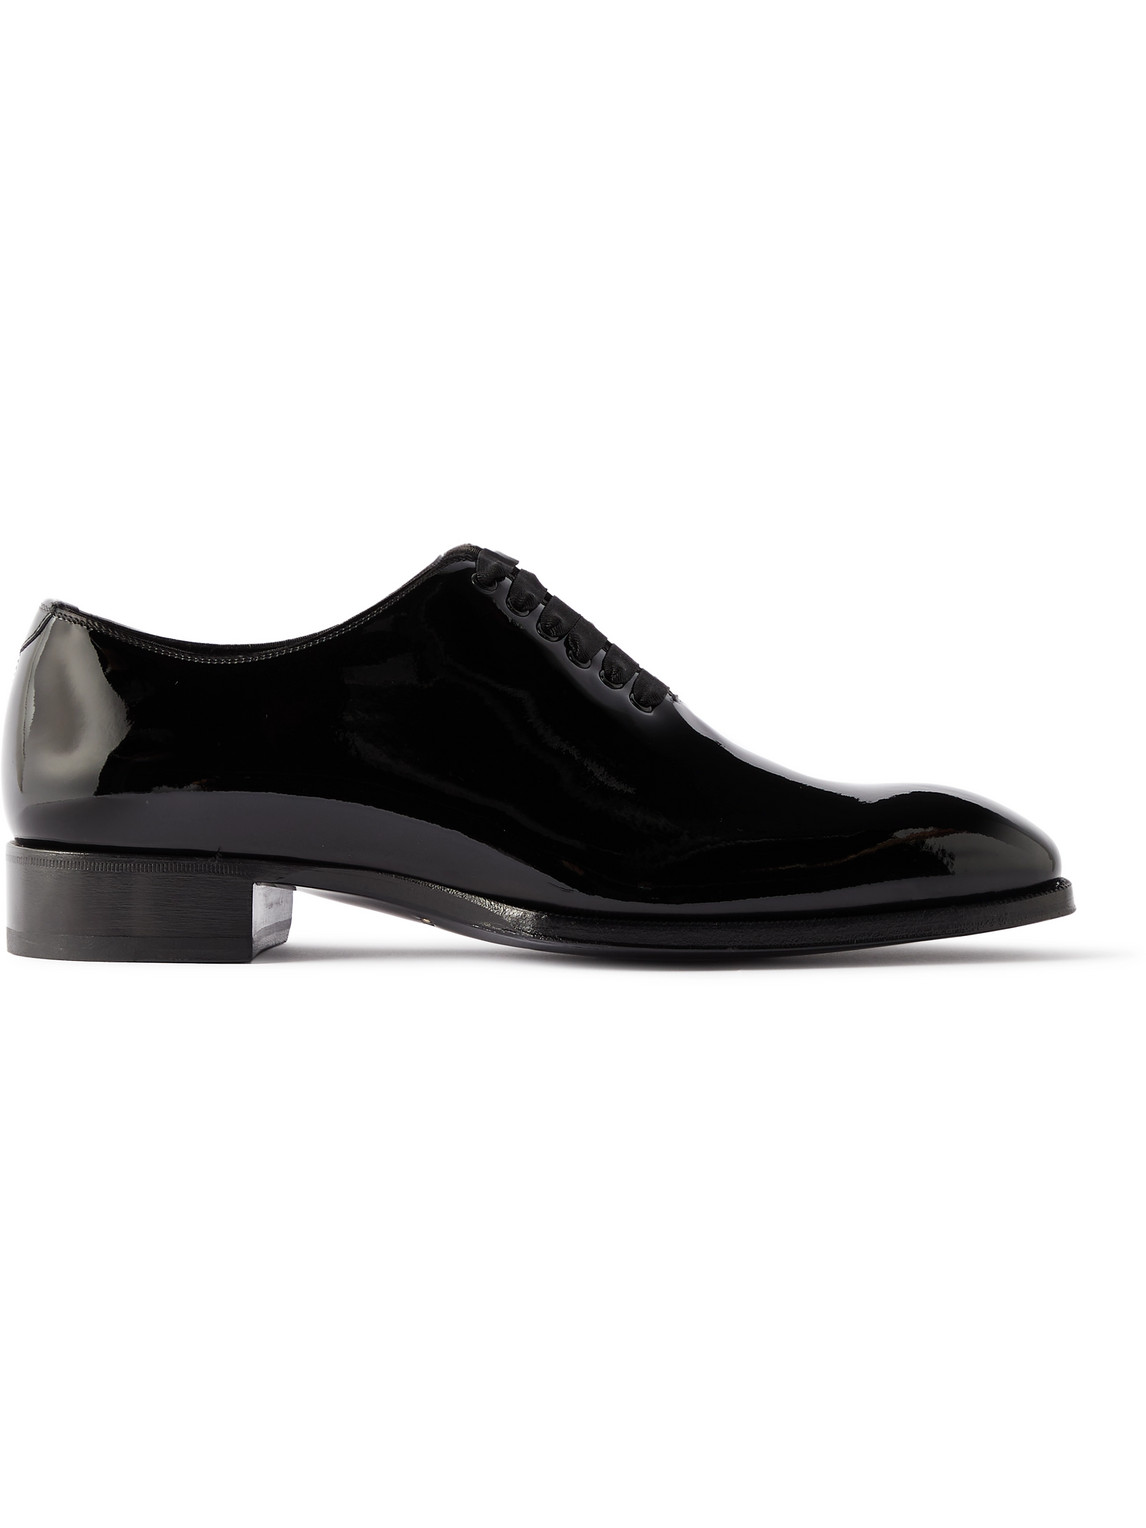 TOM FORD ELKAN WHOLE-CUT PATENT-LEATHER OXFORD SHOES